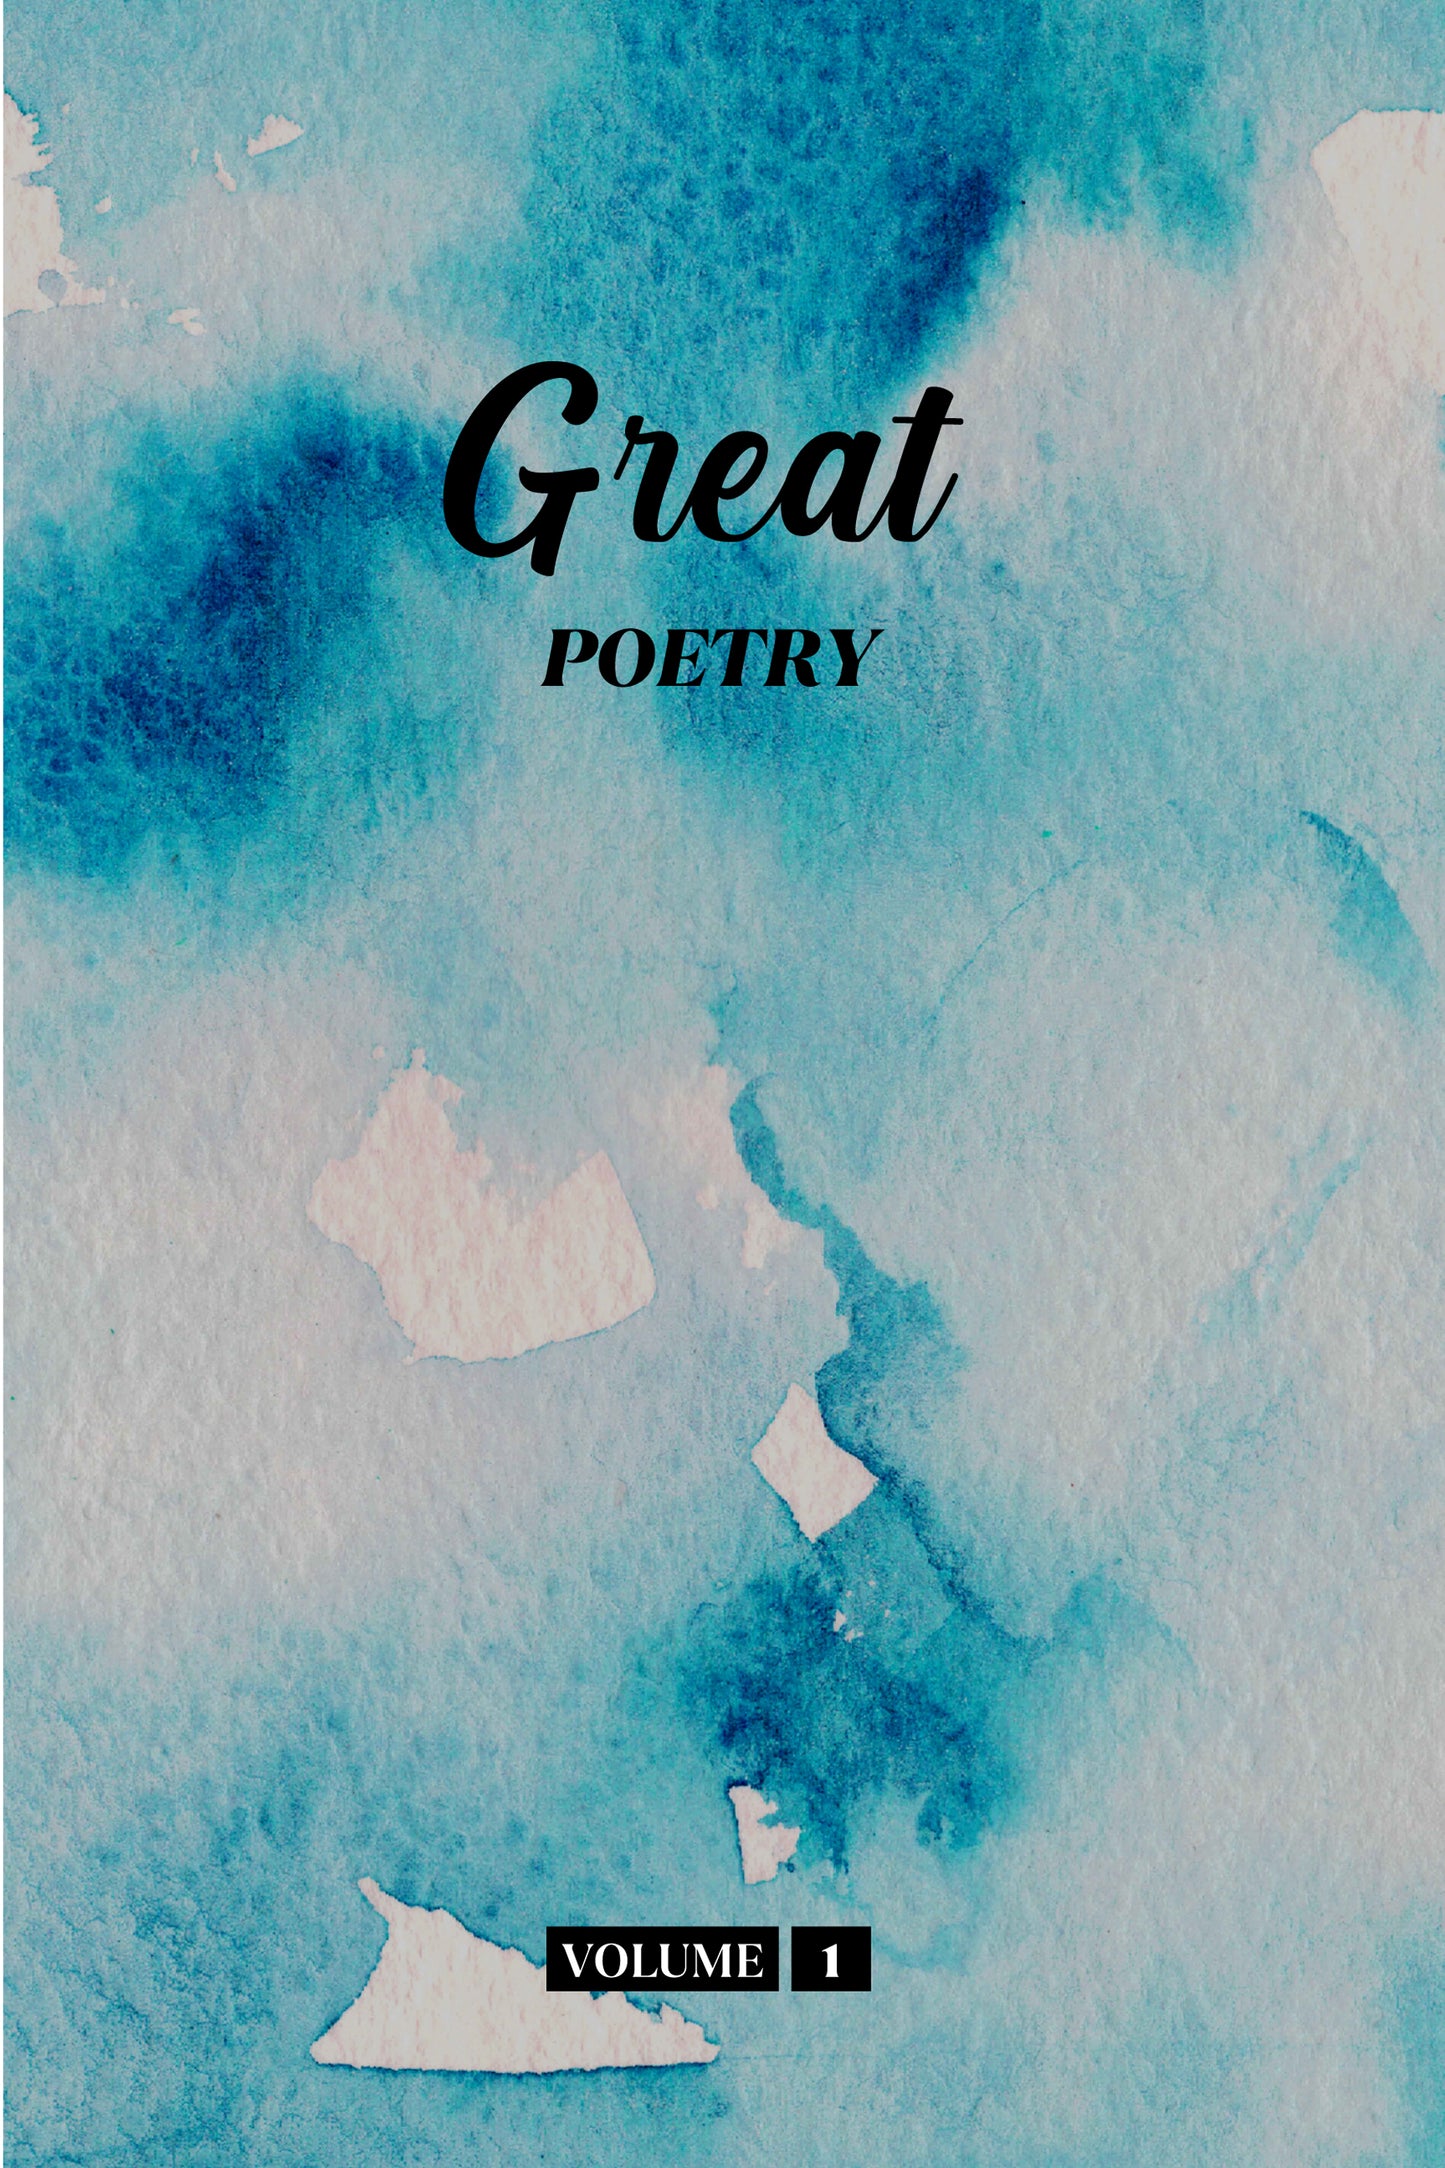 Great Poetry (Volume 1) - Physical Book